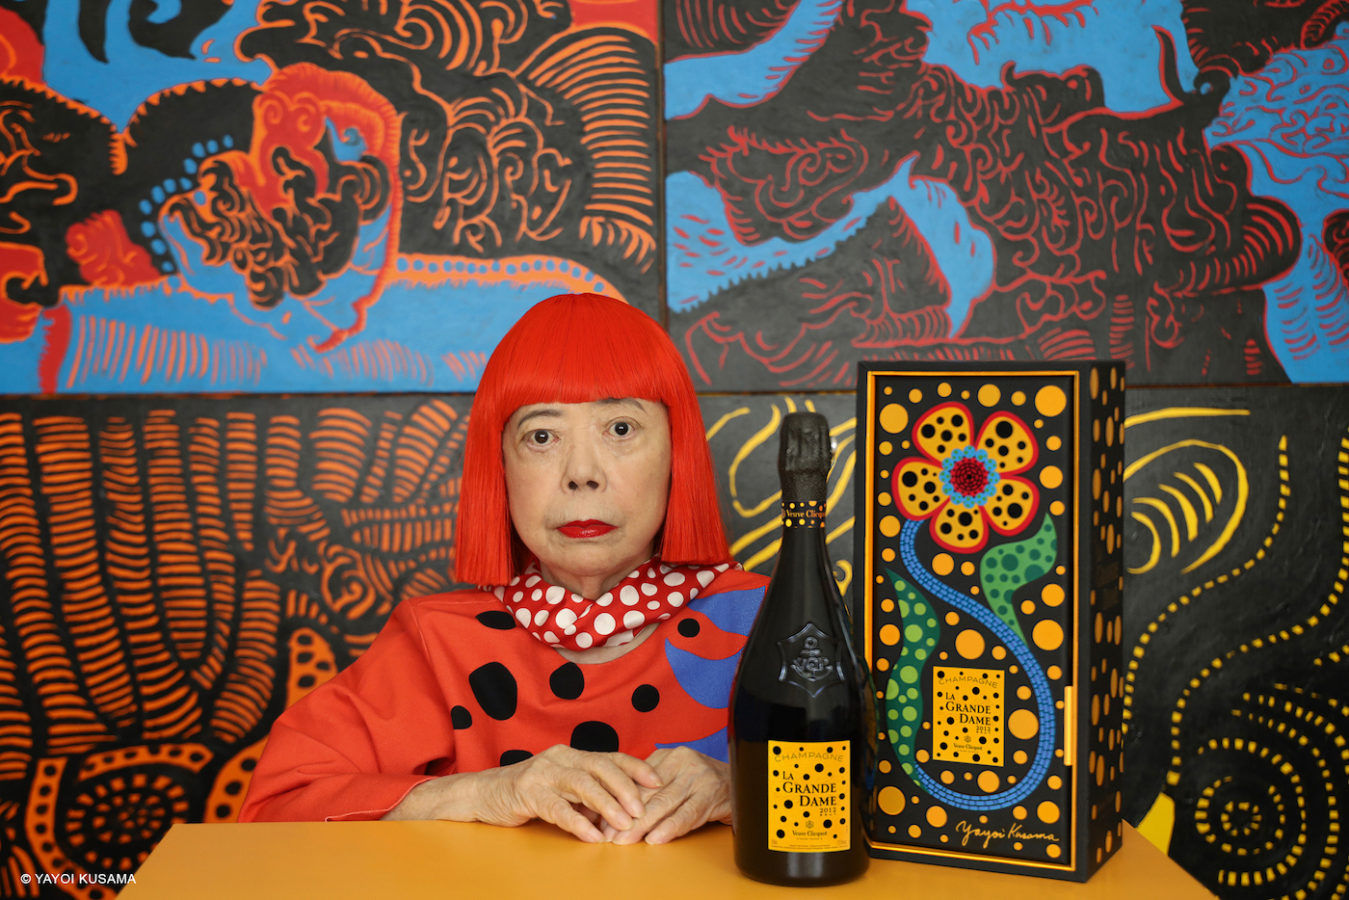 Veuve Clicquot collaborates with Yayoi Kusama to Spread a Message of Hope and Optimism